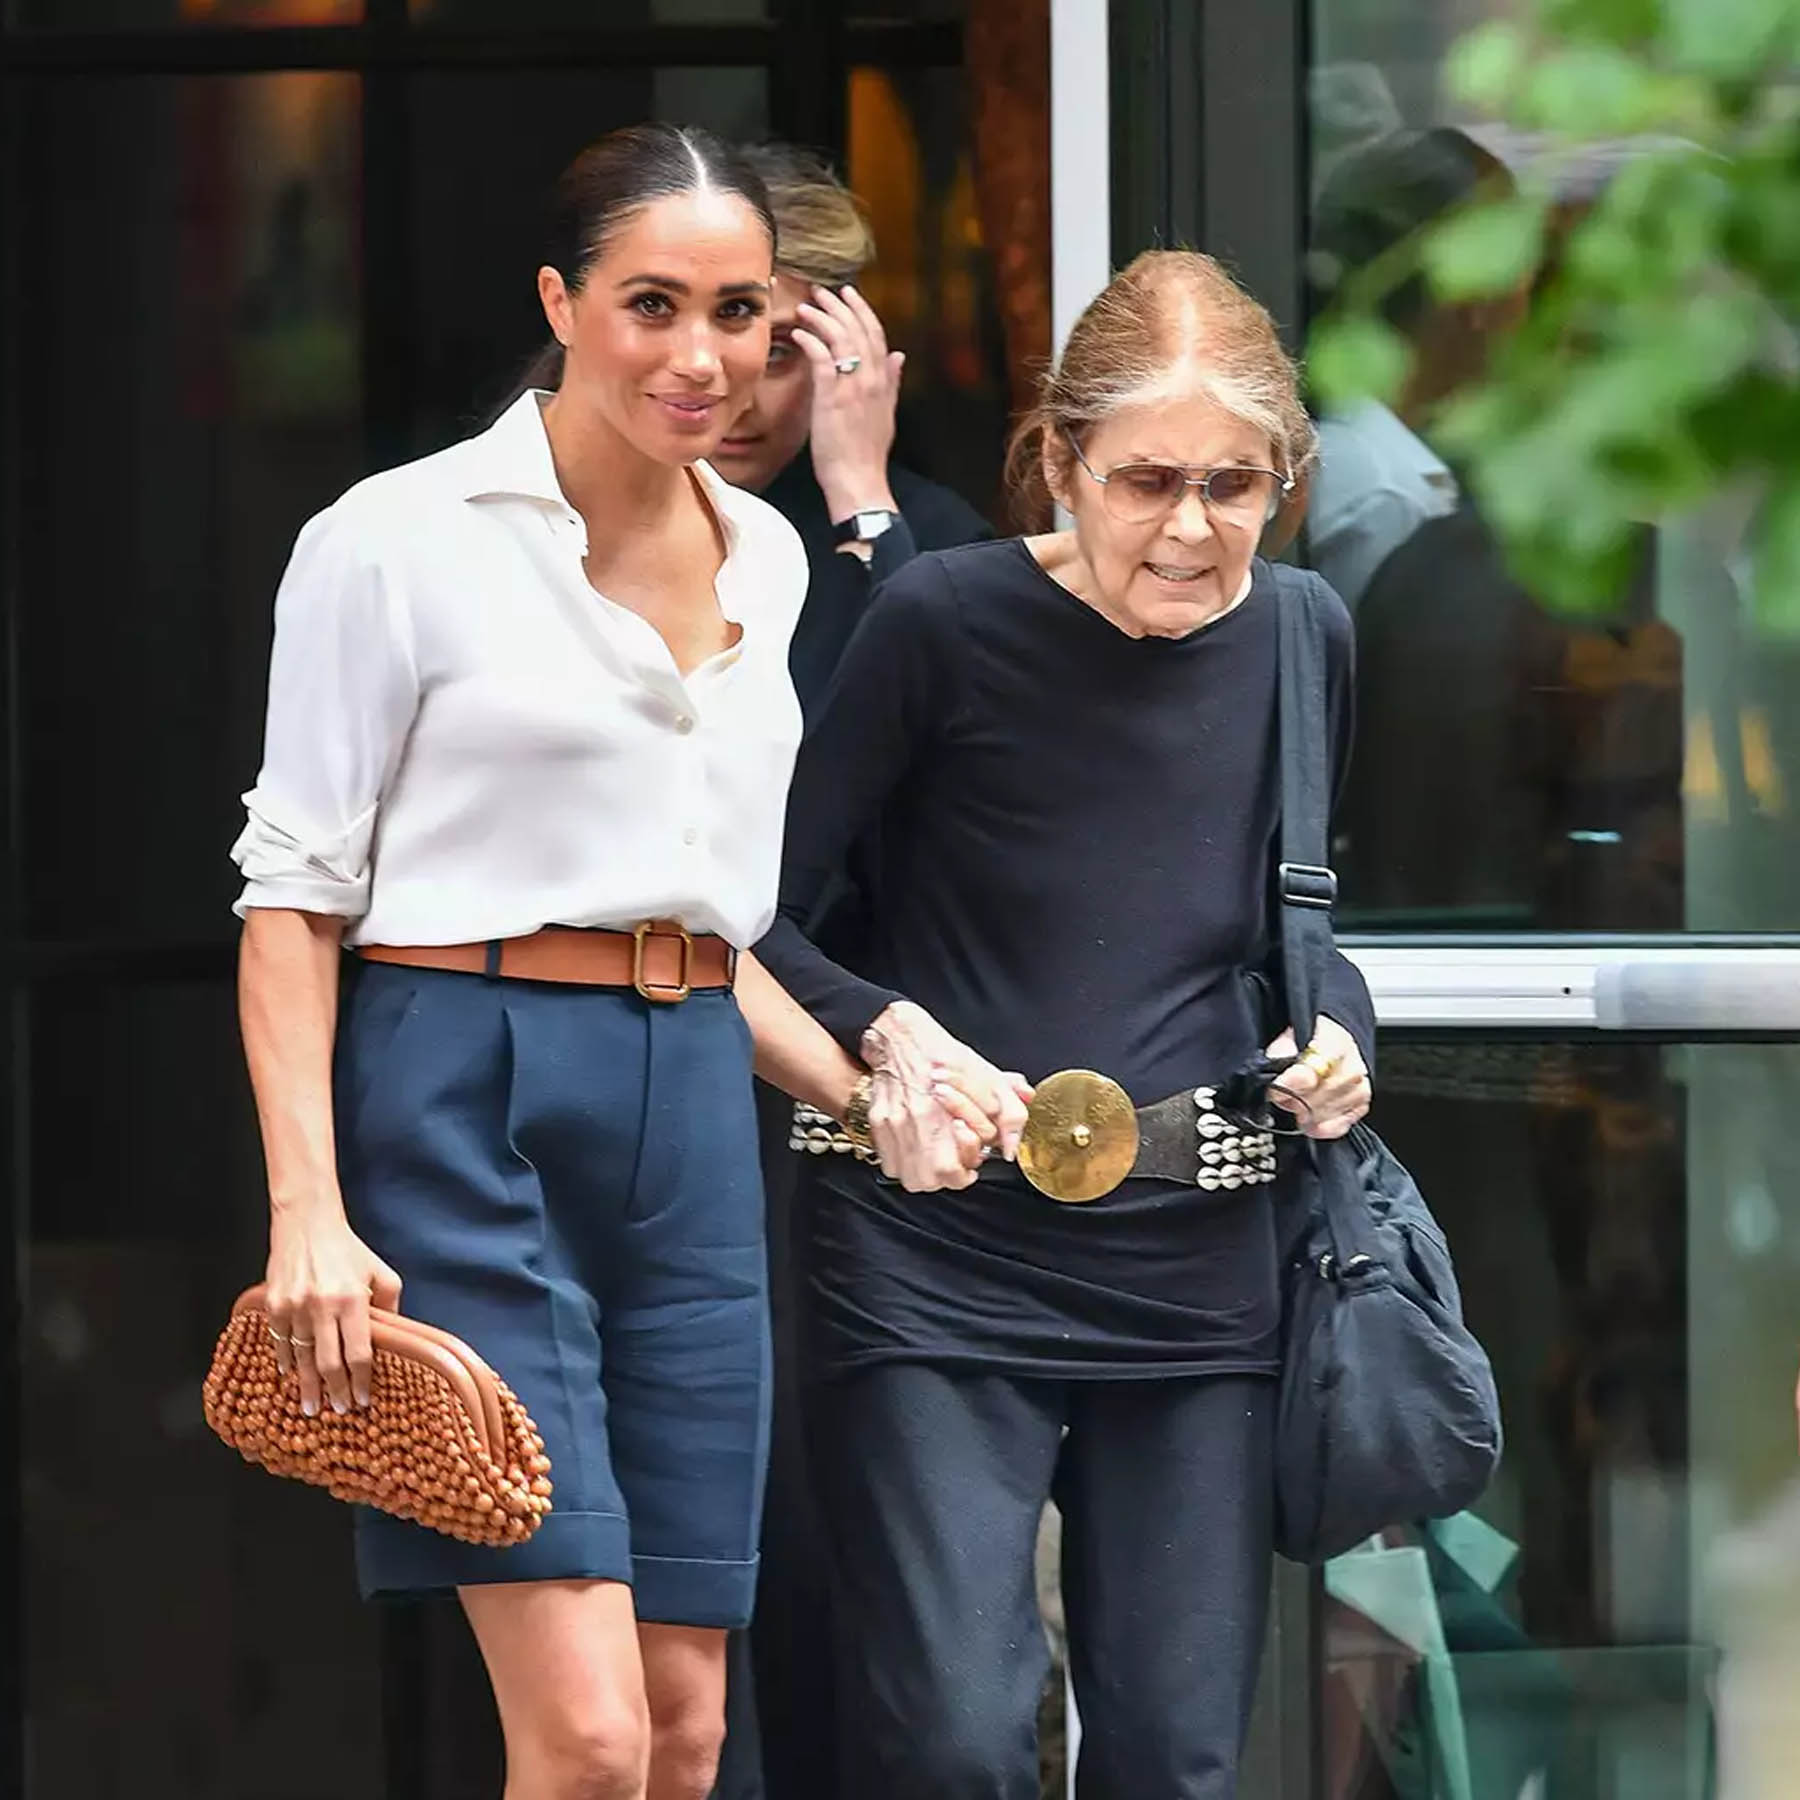 Meghan in a Summer Chic Look for Lunch with Gloria Steinem